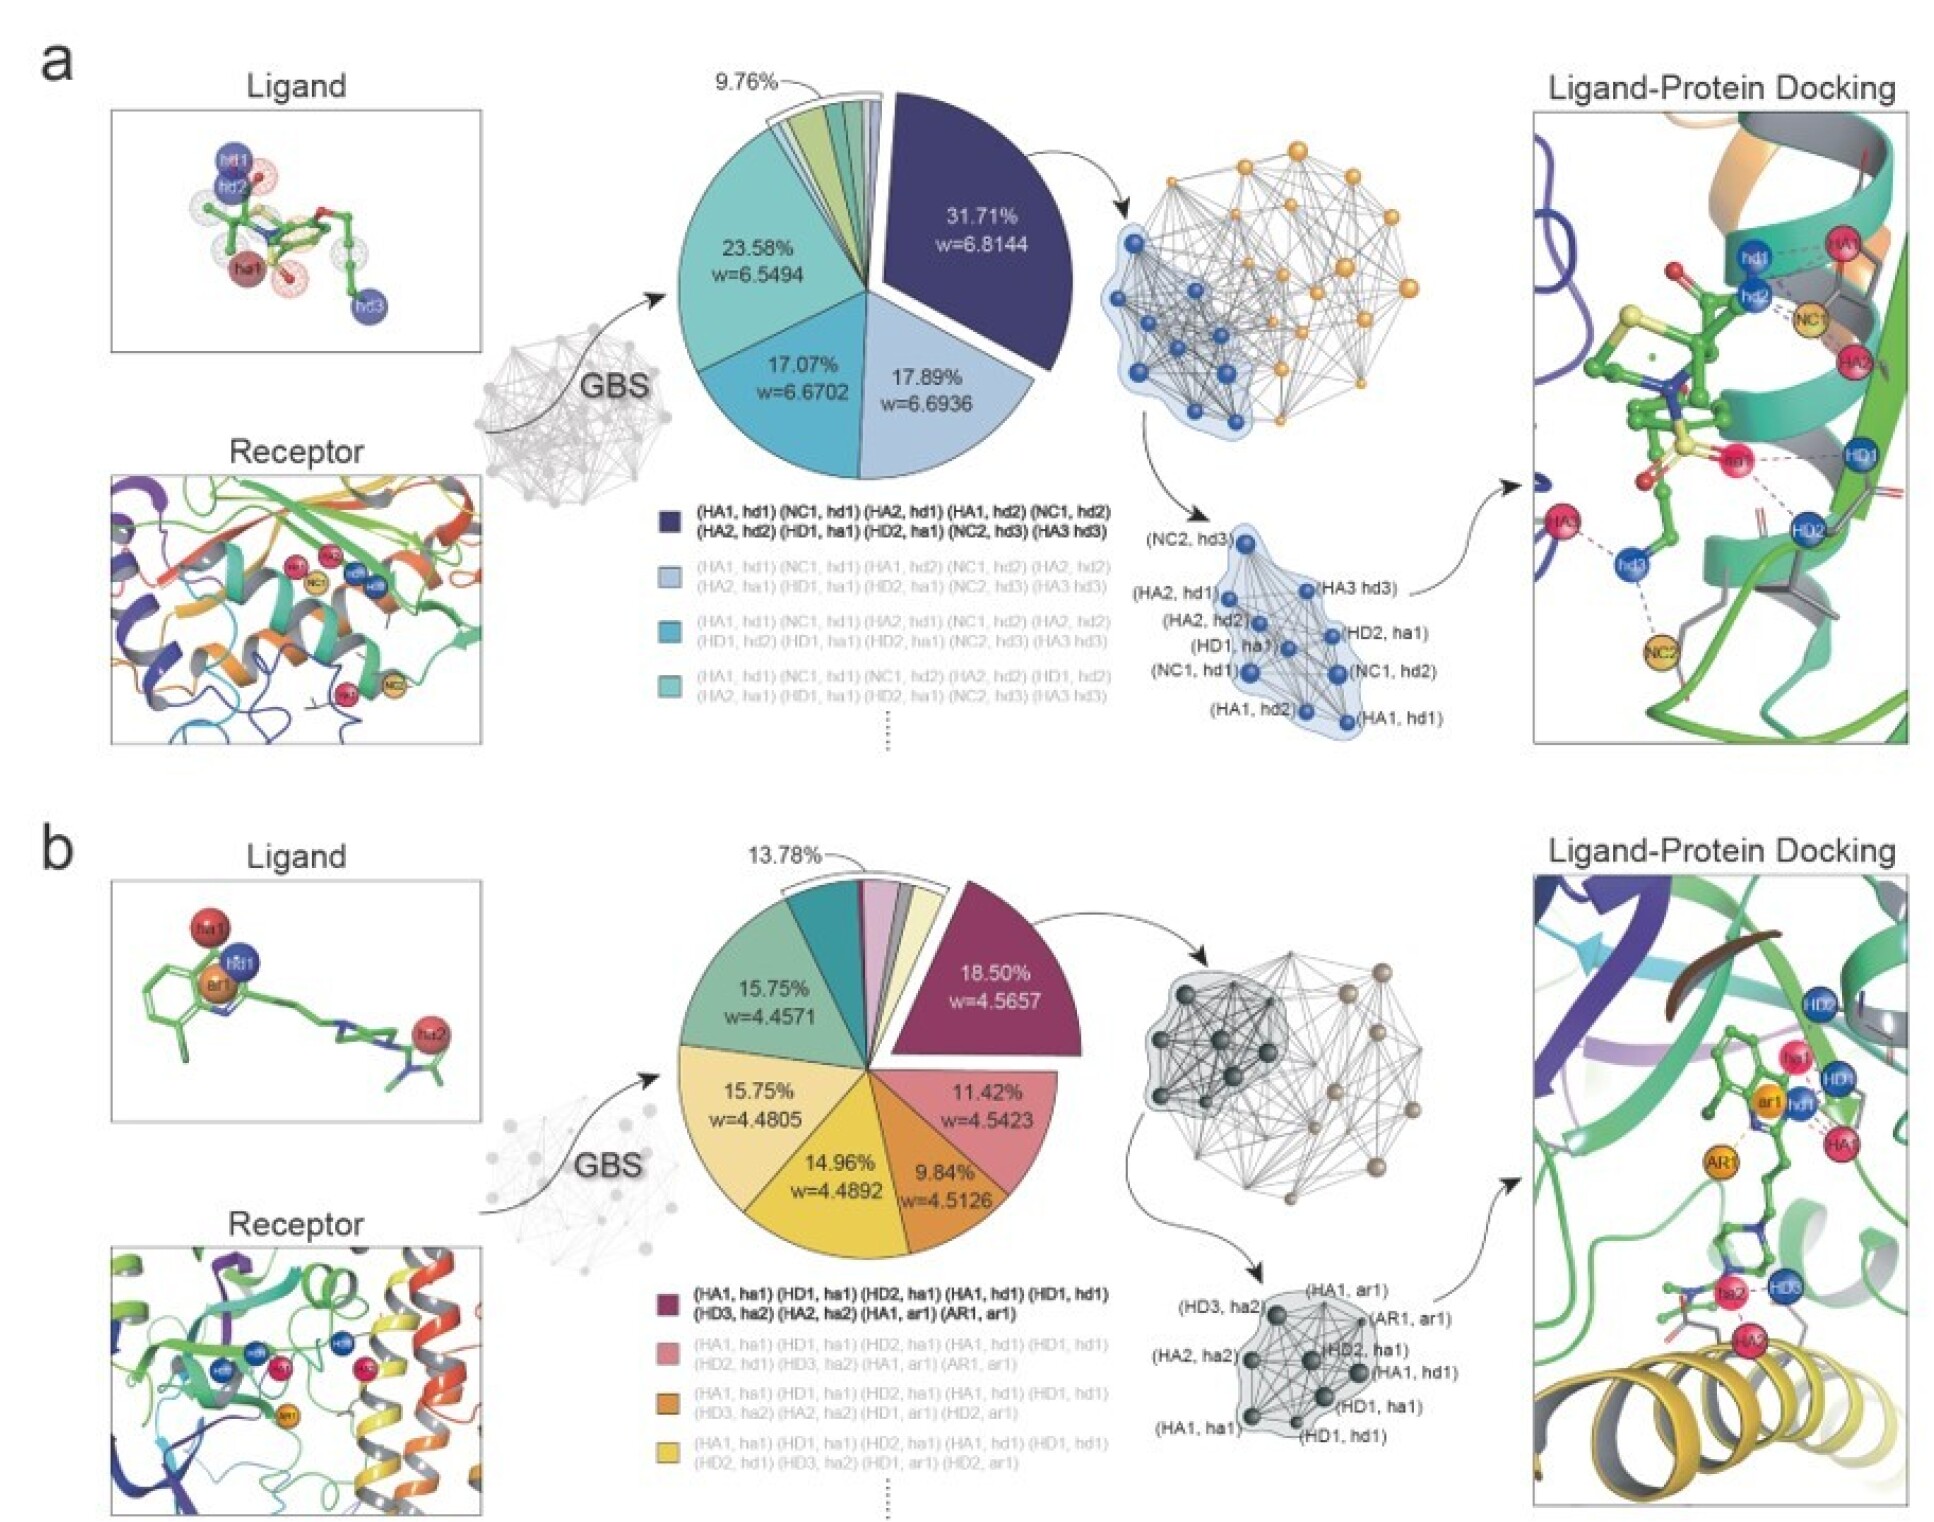 Proteins structures, pie charts and network maps